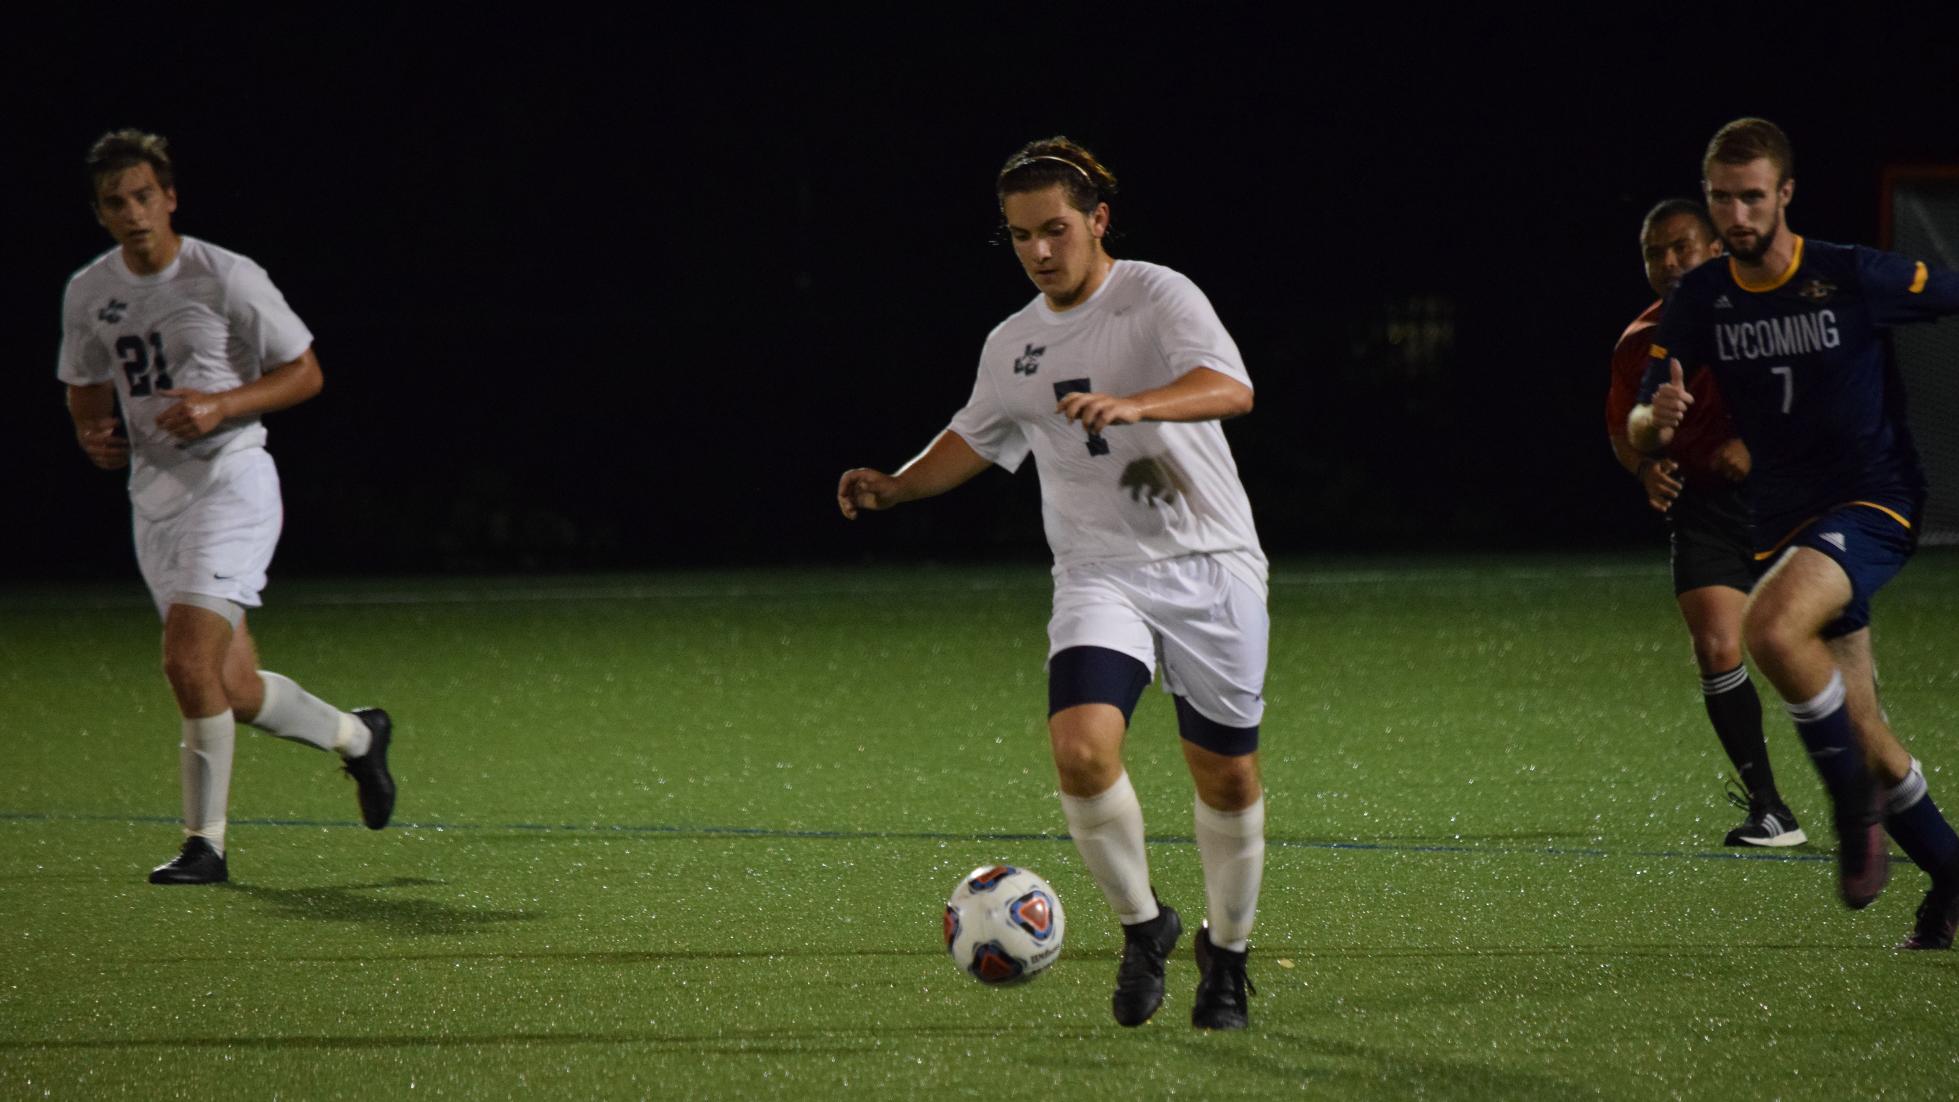 Juniata Falls in a Well-Played 2-0 Decision Against Lycoming